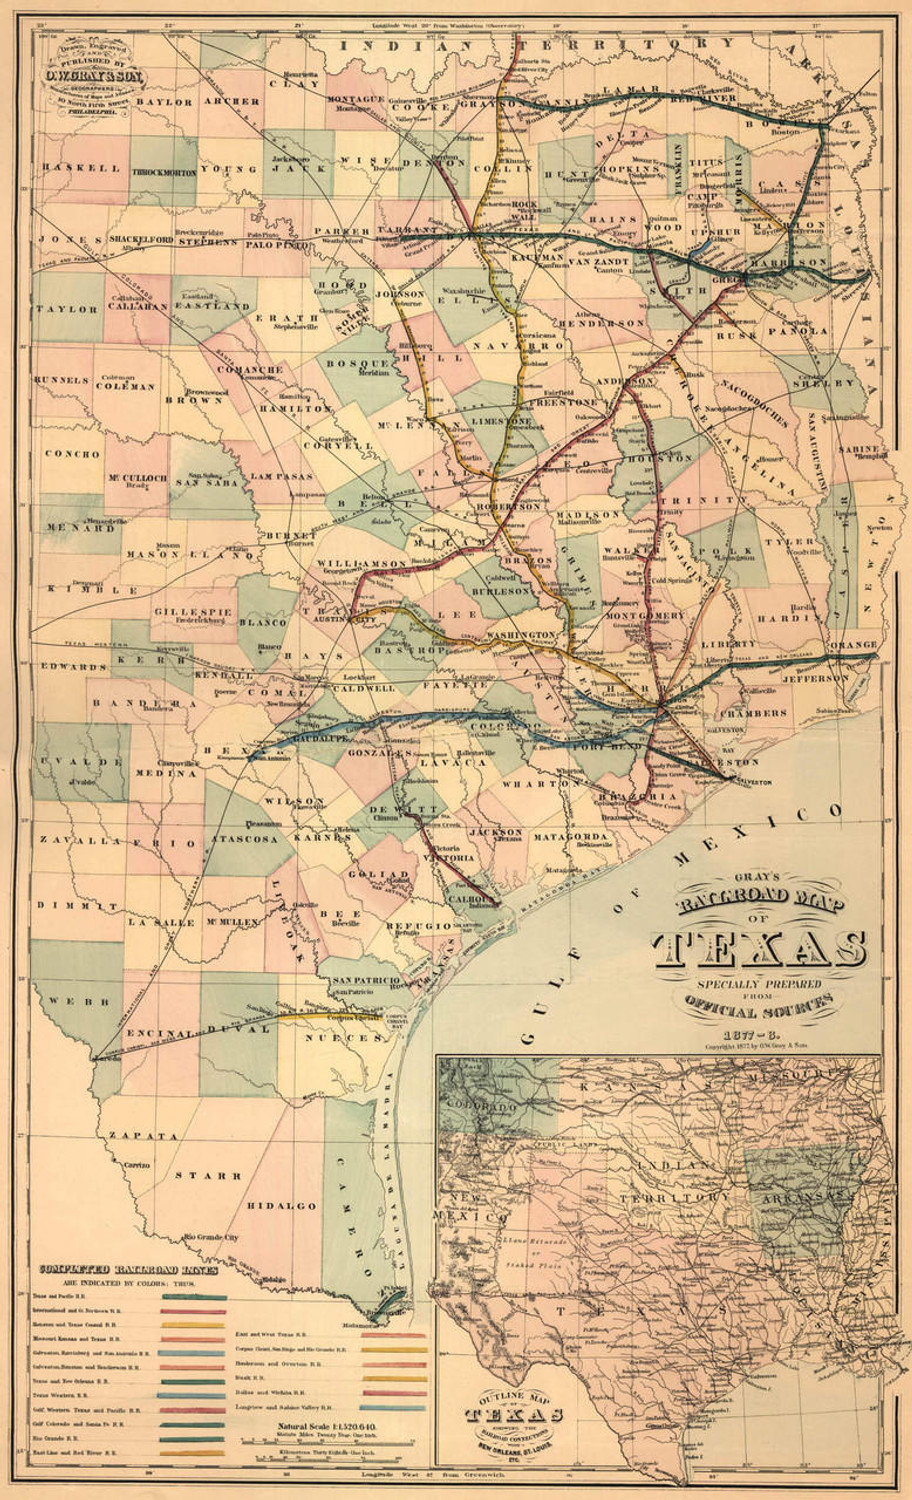 Historic Railroad Map of Texas - 1877, image 1, World Maps Online